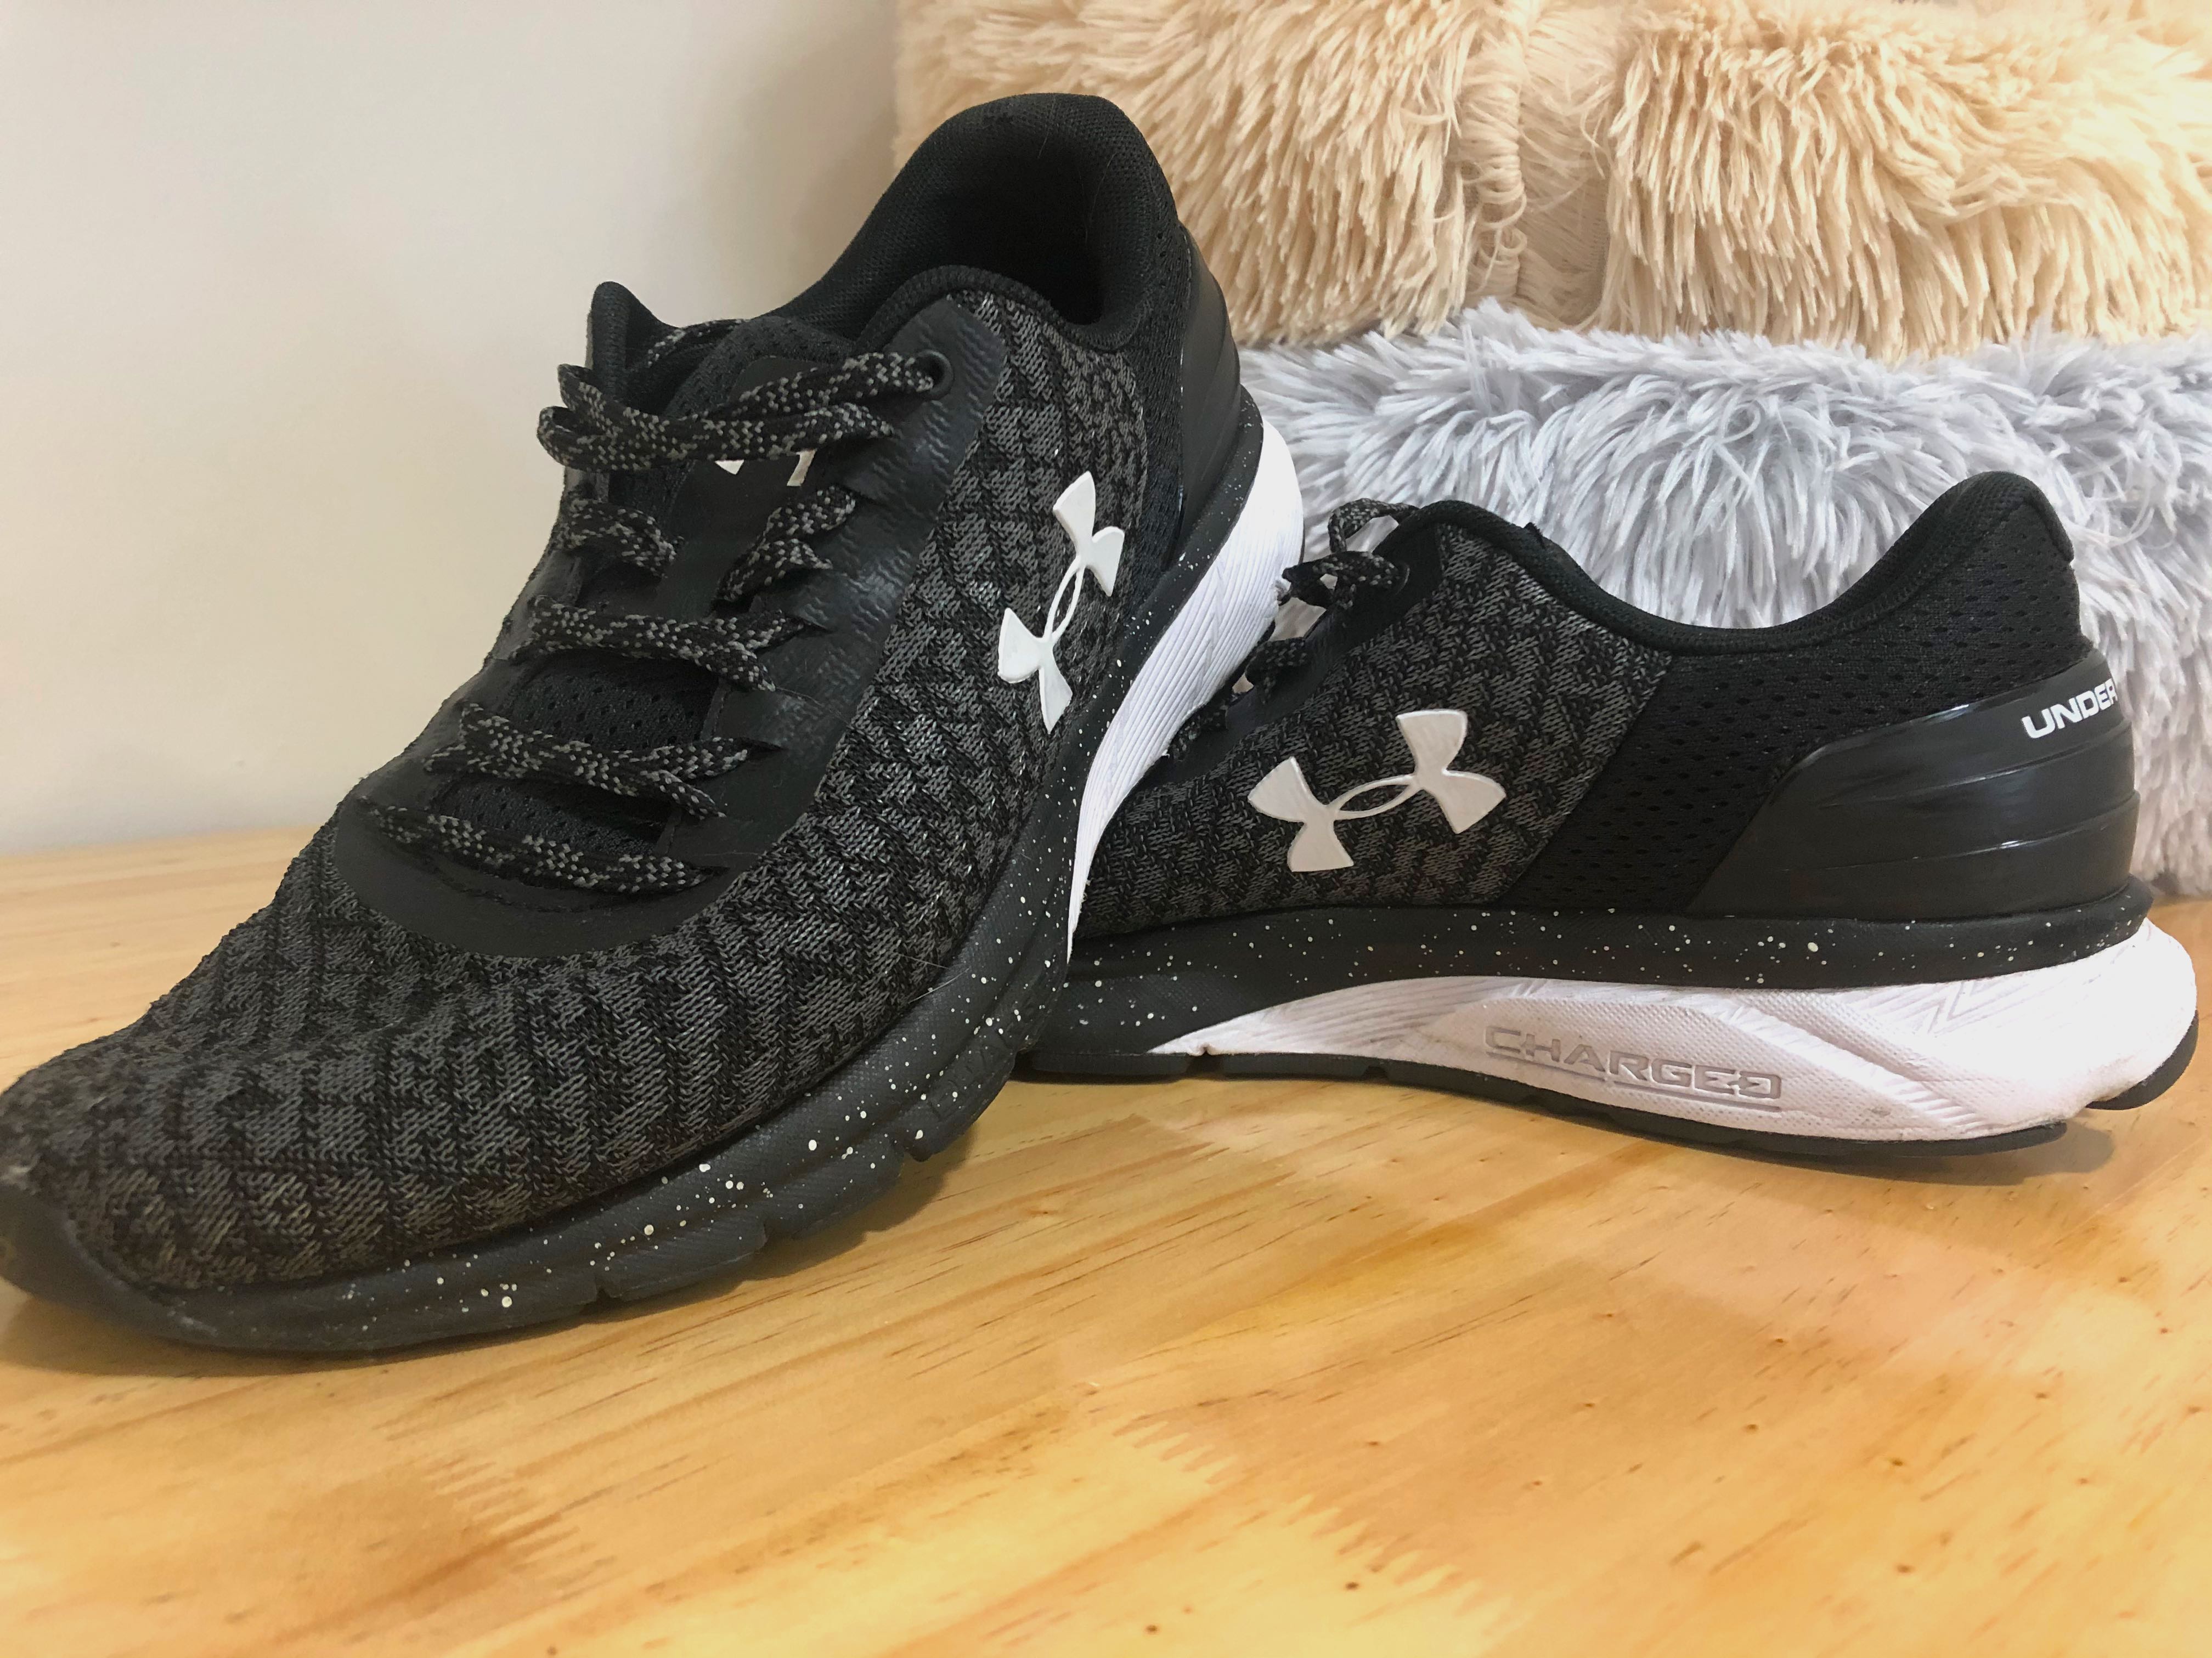 Under Armour UA Men's Charged Escape 2 Running Shoes - Black / Black /  White US 8 UK 7 26cm, Men's Fashion, Footwear, Sneakers on Carousell